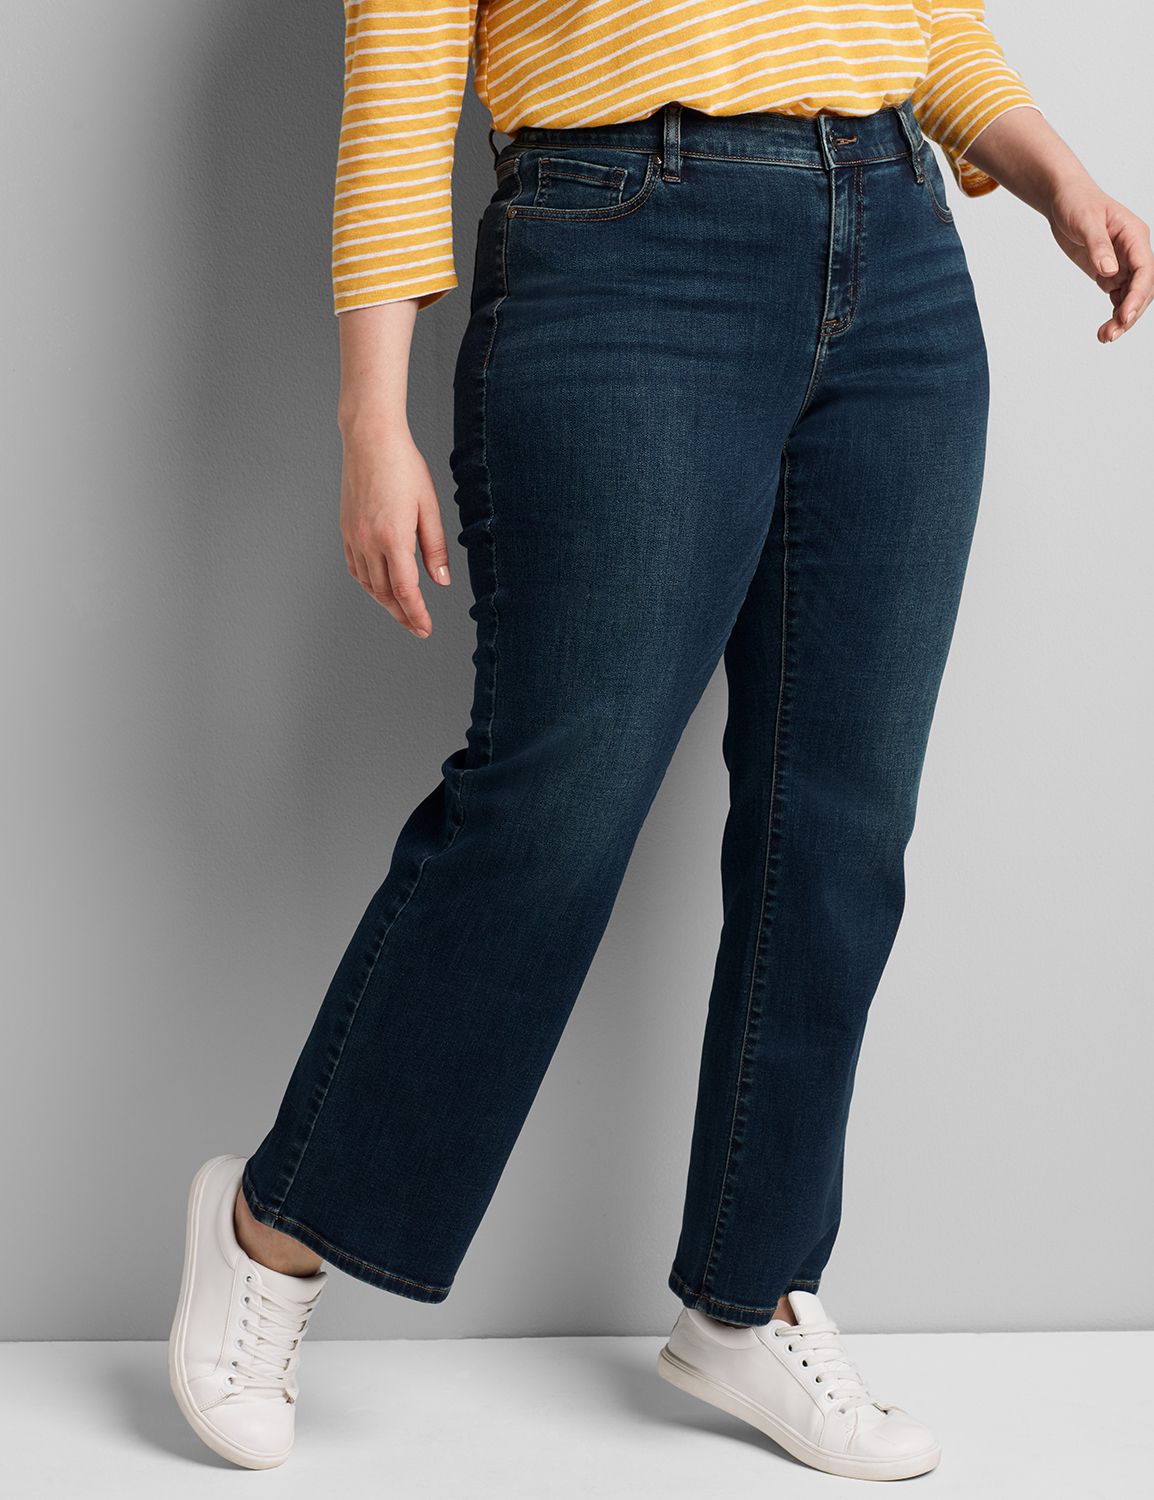 Lane Bryant - Xoxo, I.Joelle is on 🔥 in our high rise skinny jeans with  the New FLEX Magic Waistband. 💙 Shop now or stop by our stores this  weekend for the